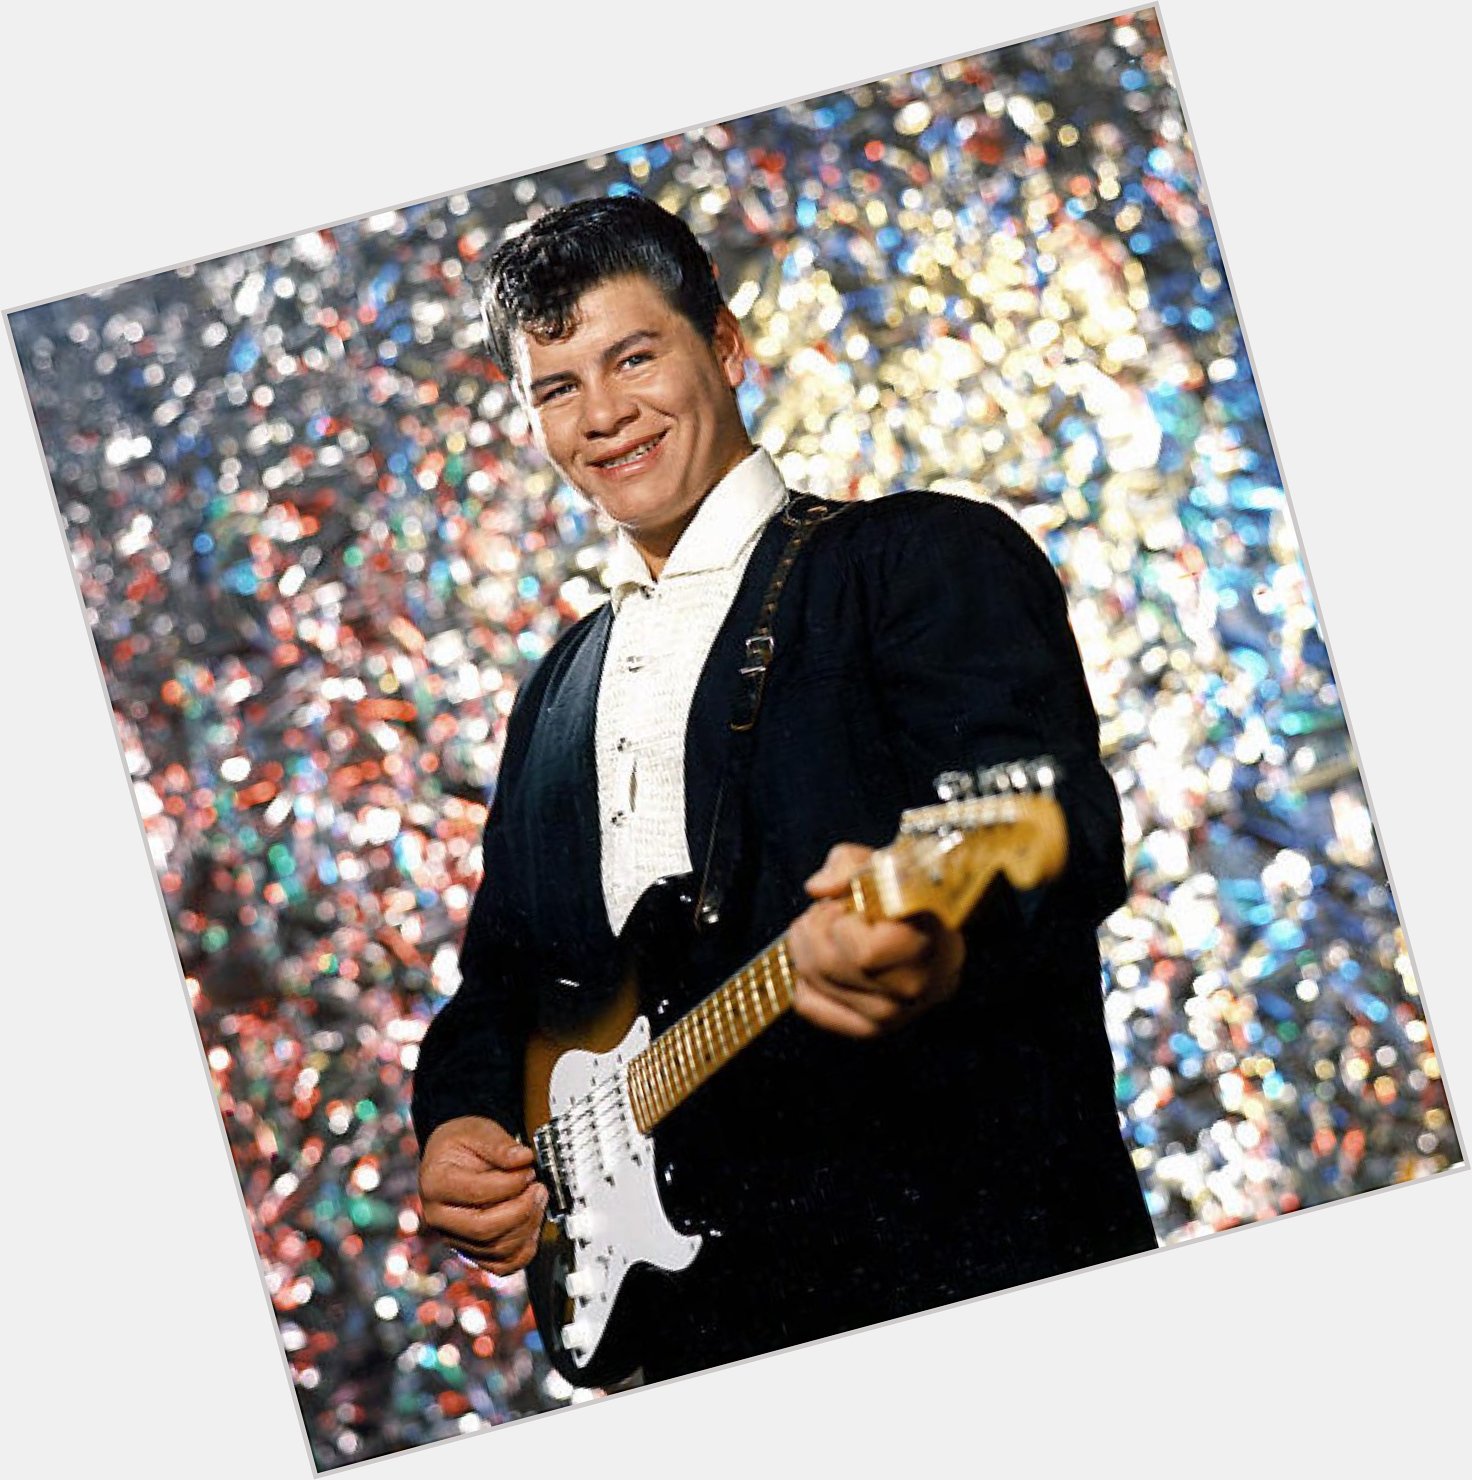 Happy Birthday to Ritchie Valens, who would have turned 74 today! 